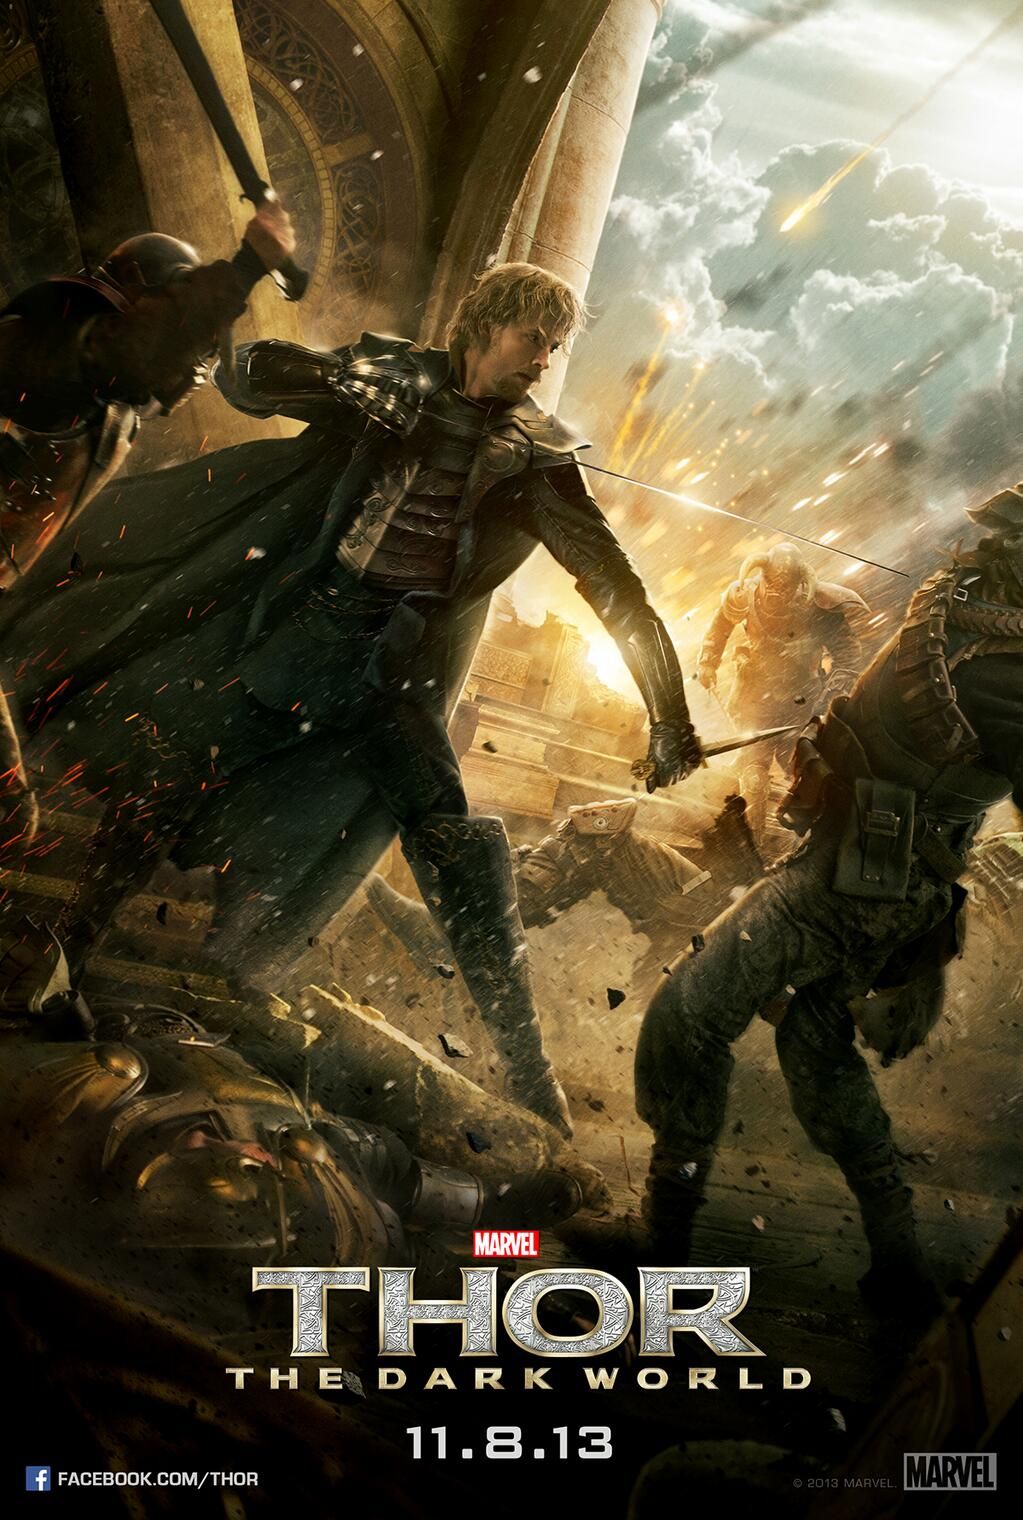 Thor: The Dark World Fandral Character Poster